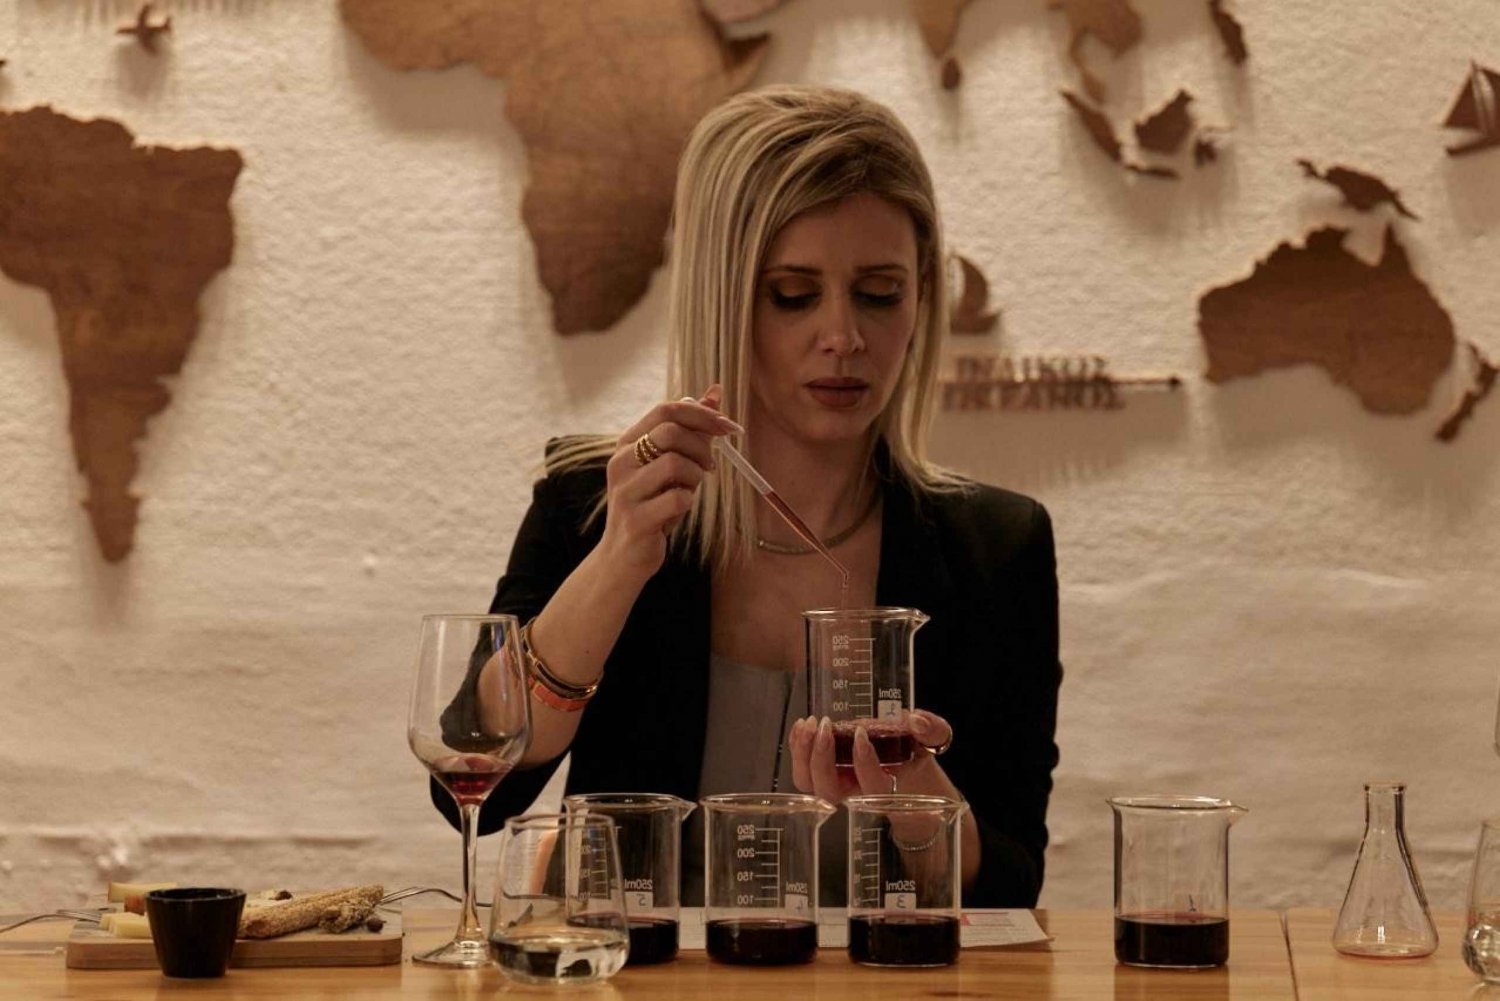 Create you own Wine in Athens city center